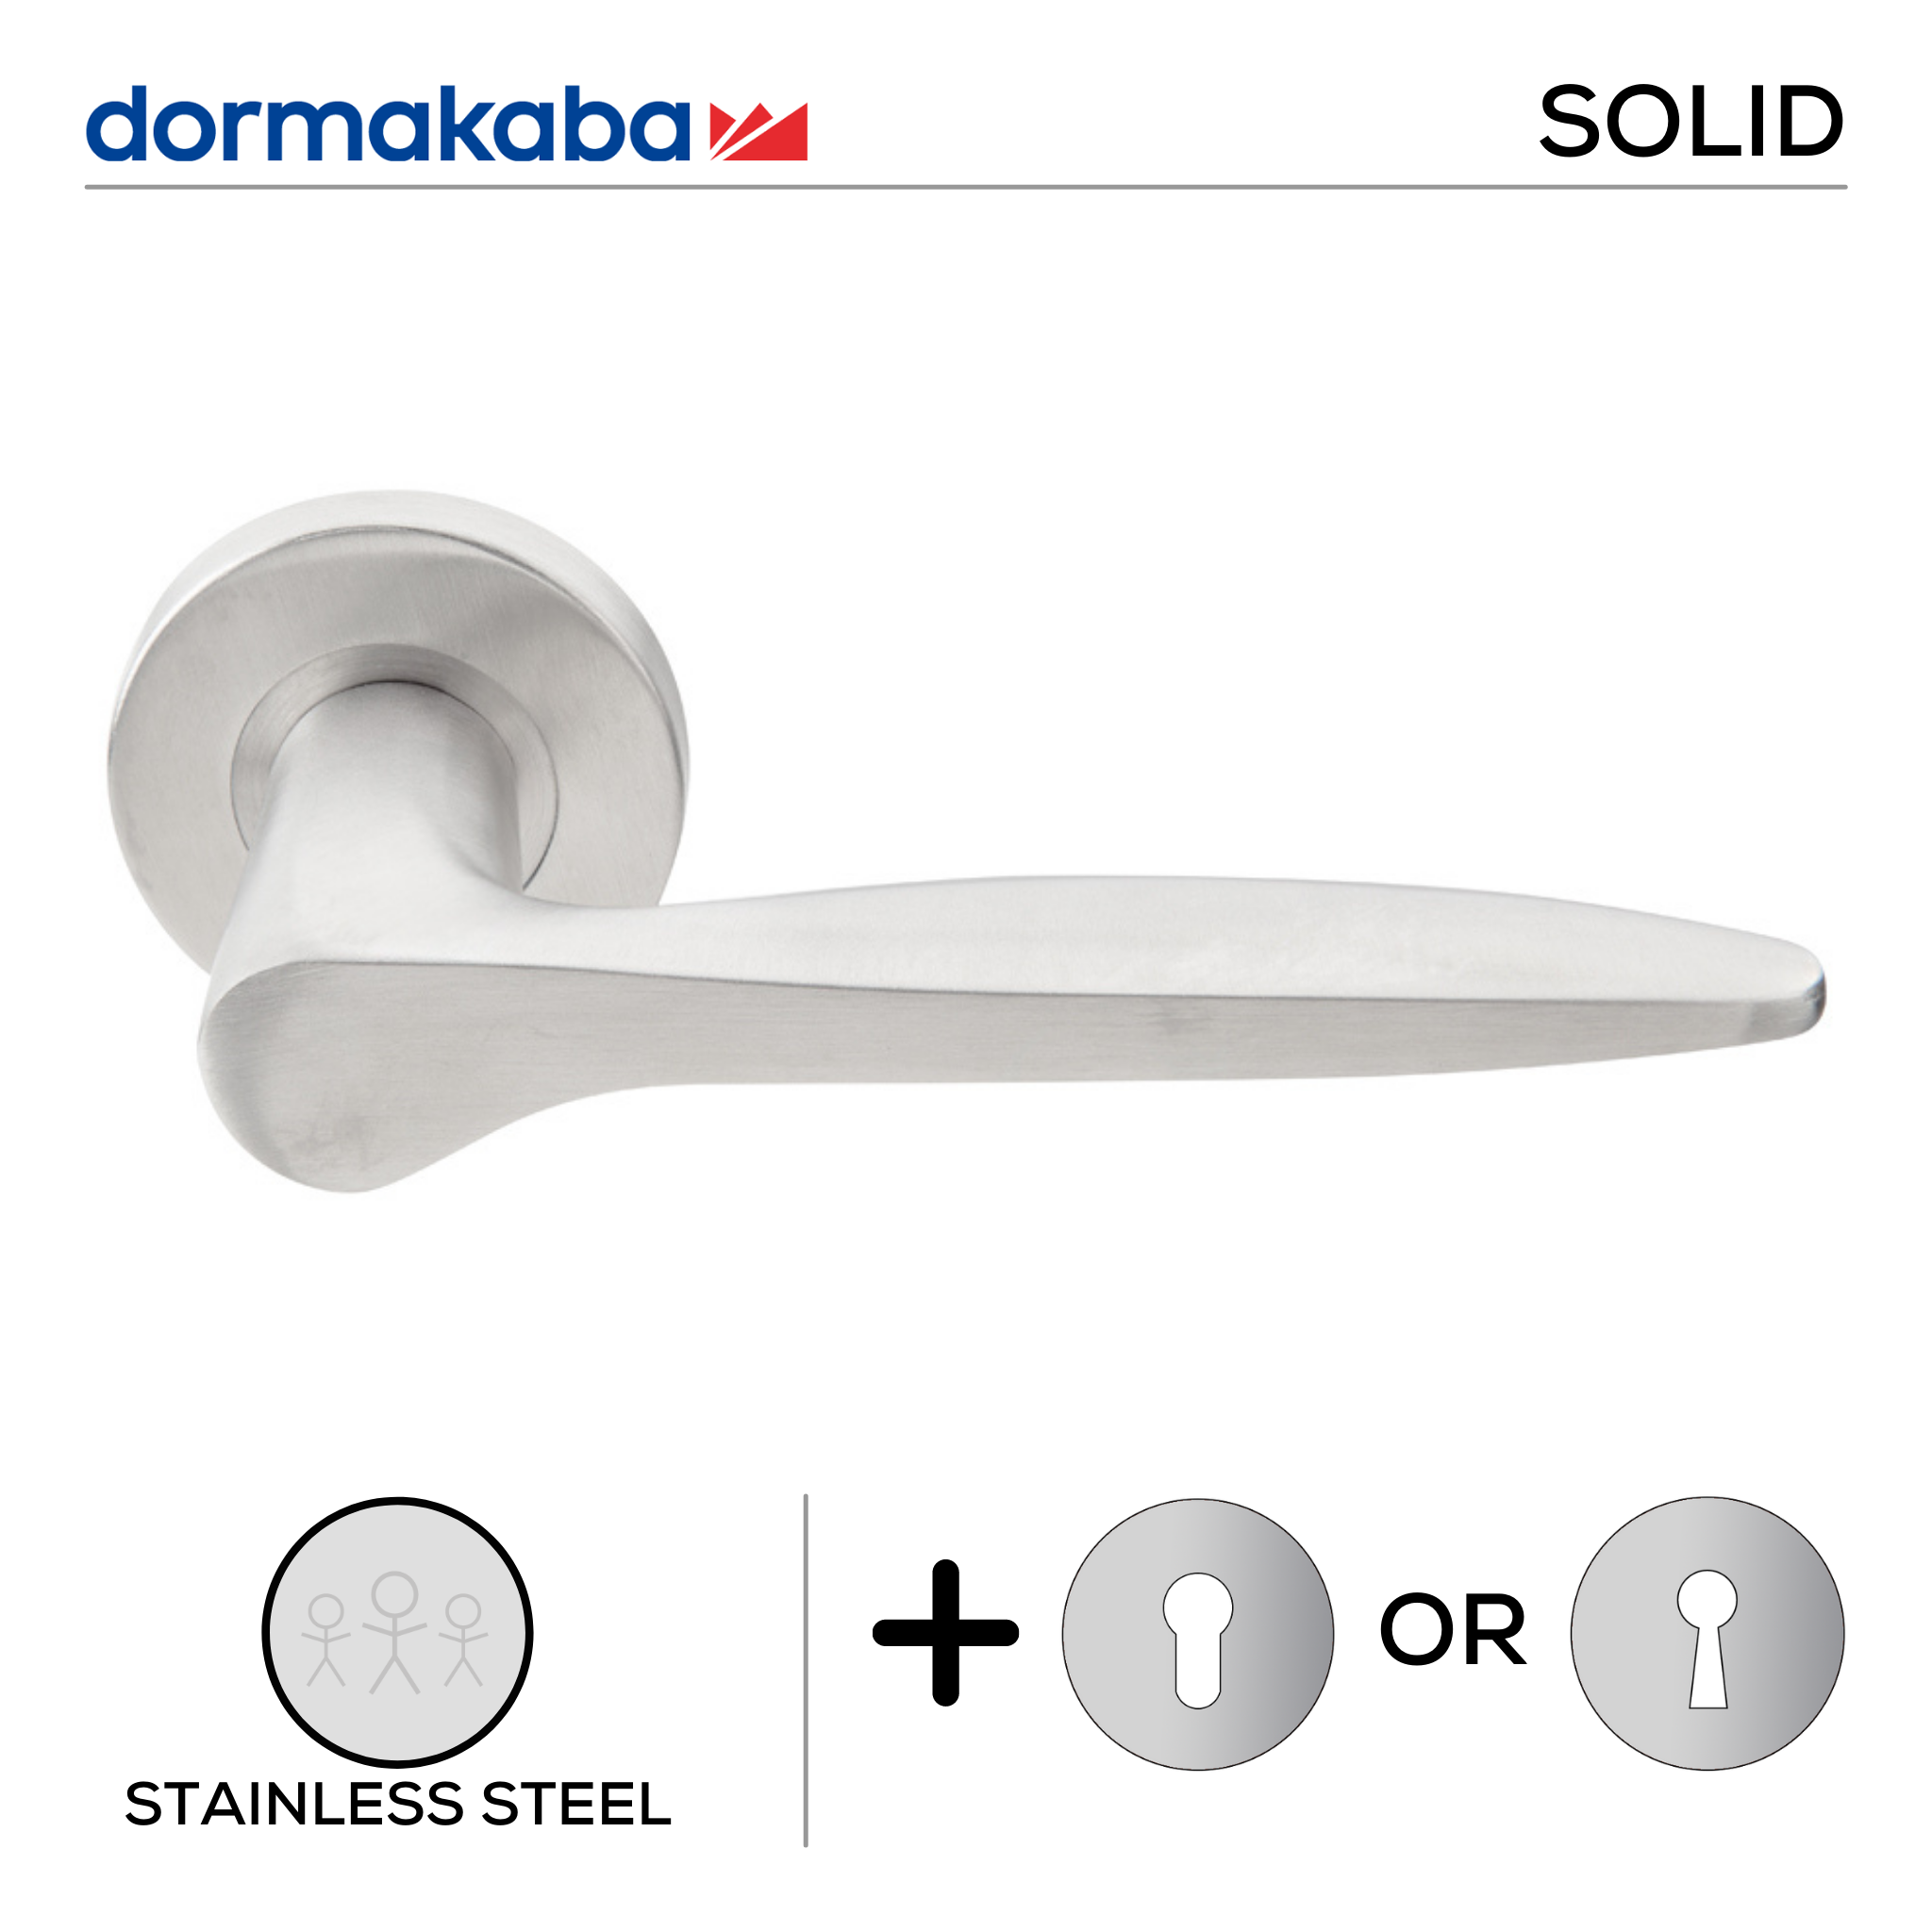 SH 825, Lever Handles, Solid, On Round Rose, With Escutcheons, 145mm (l), Stainless Steel, DORMAKABA